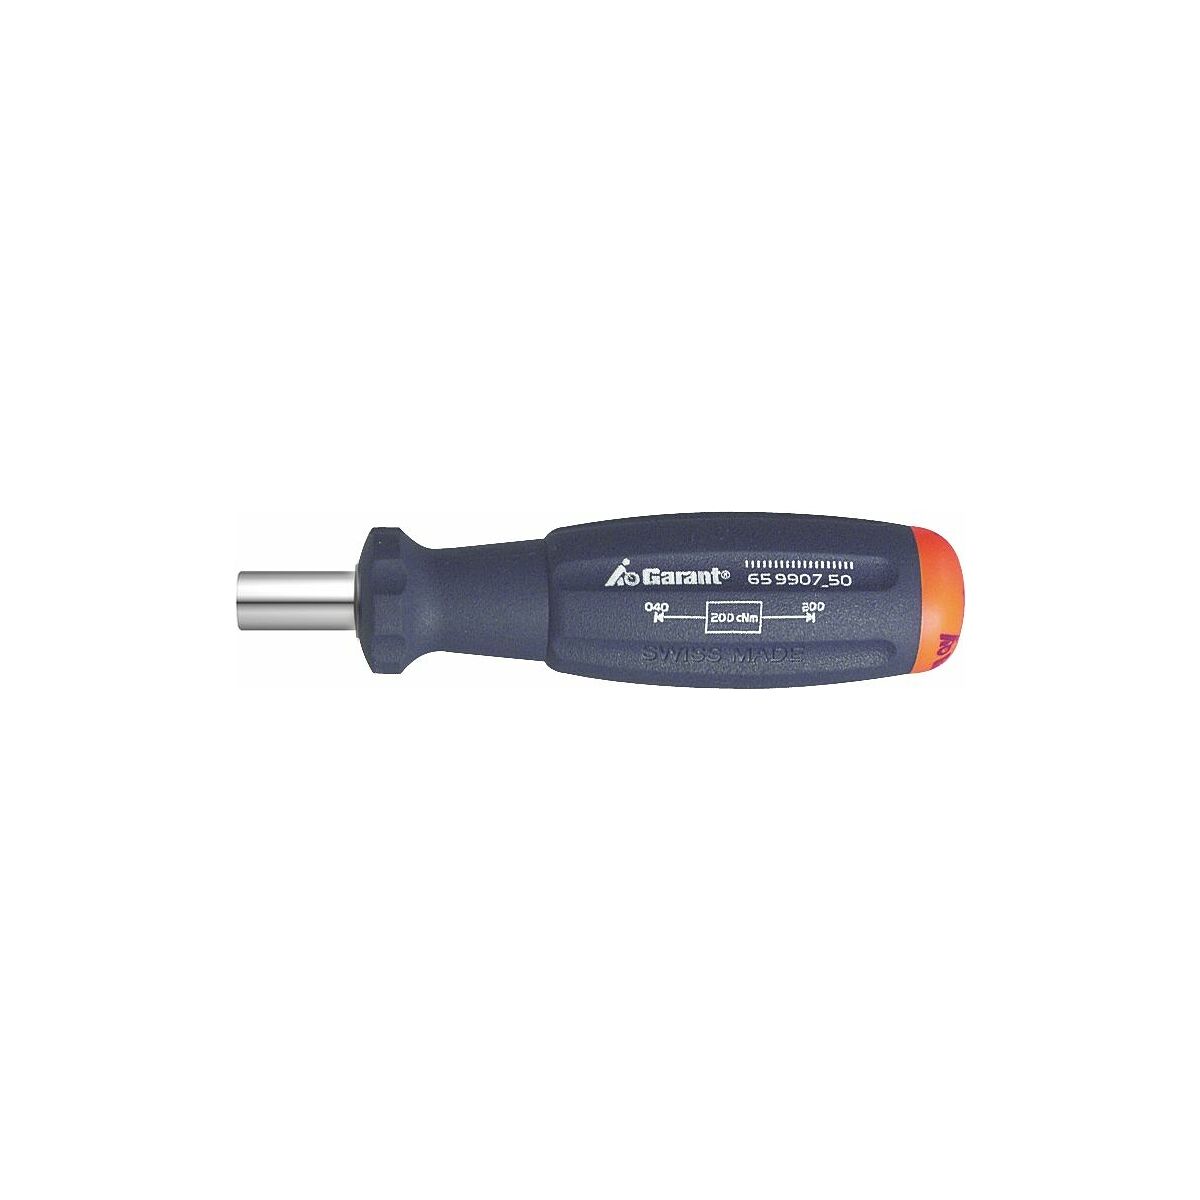 Torque screwdriver without scale, to take D 6.3 bits